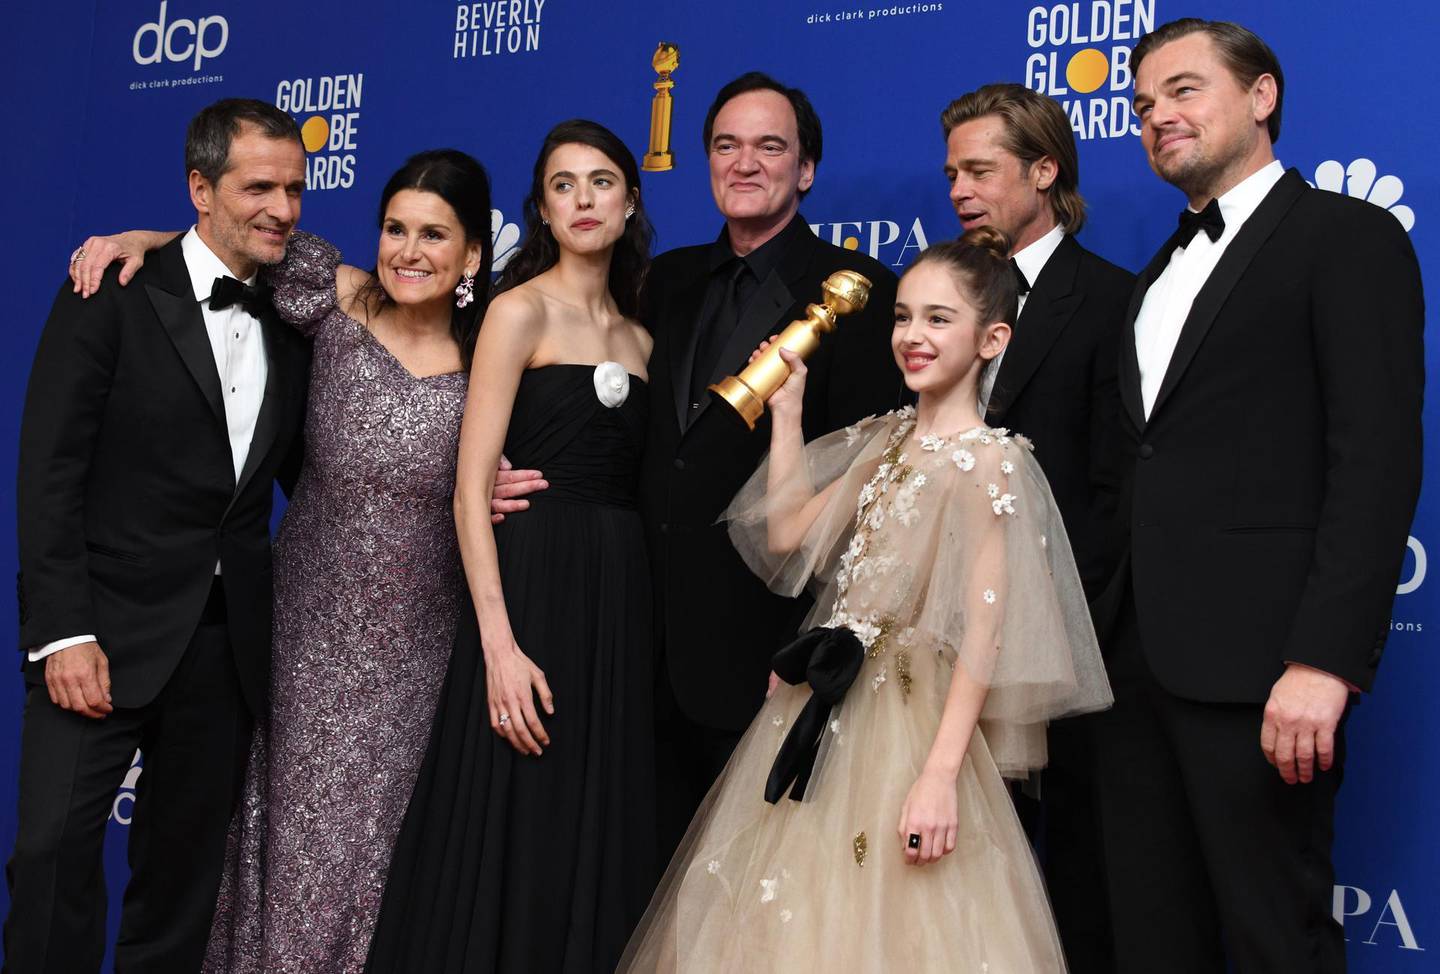 epa08106655 (L-R) David Heyman, Shannon McIntosh, Margaret Qualley, Quentin Tarantino, Brad Pitt, Julia Butters, and Leonardo DiCaprio pose with the award for Best Motion Picture Musical or Comedy for 'Once Upon A Time... In Hollywood' in the press room during the 77th annual Golden Globe Awards ceremony at the Beverly Hilton Hotel, in Beverly Hills, California, USA, 05 January 2020.  EPA/CHRISTIAN MONTERROSA